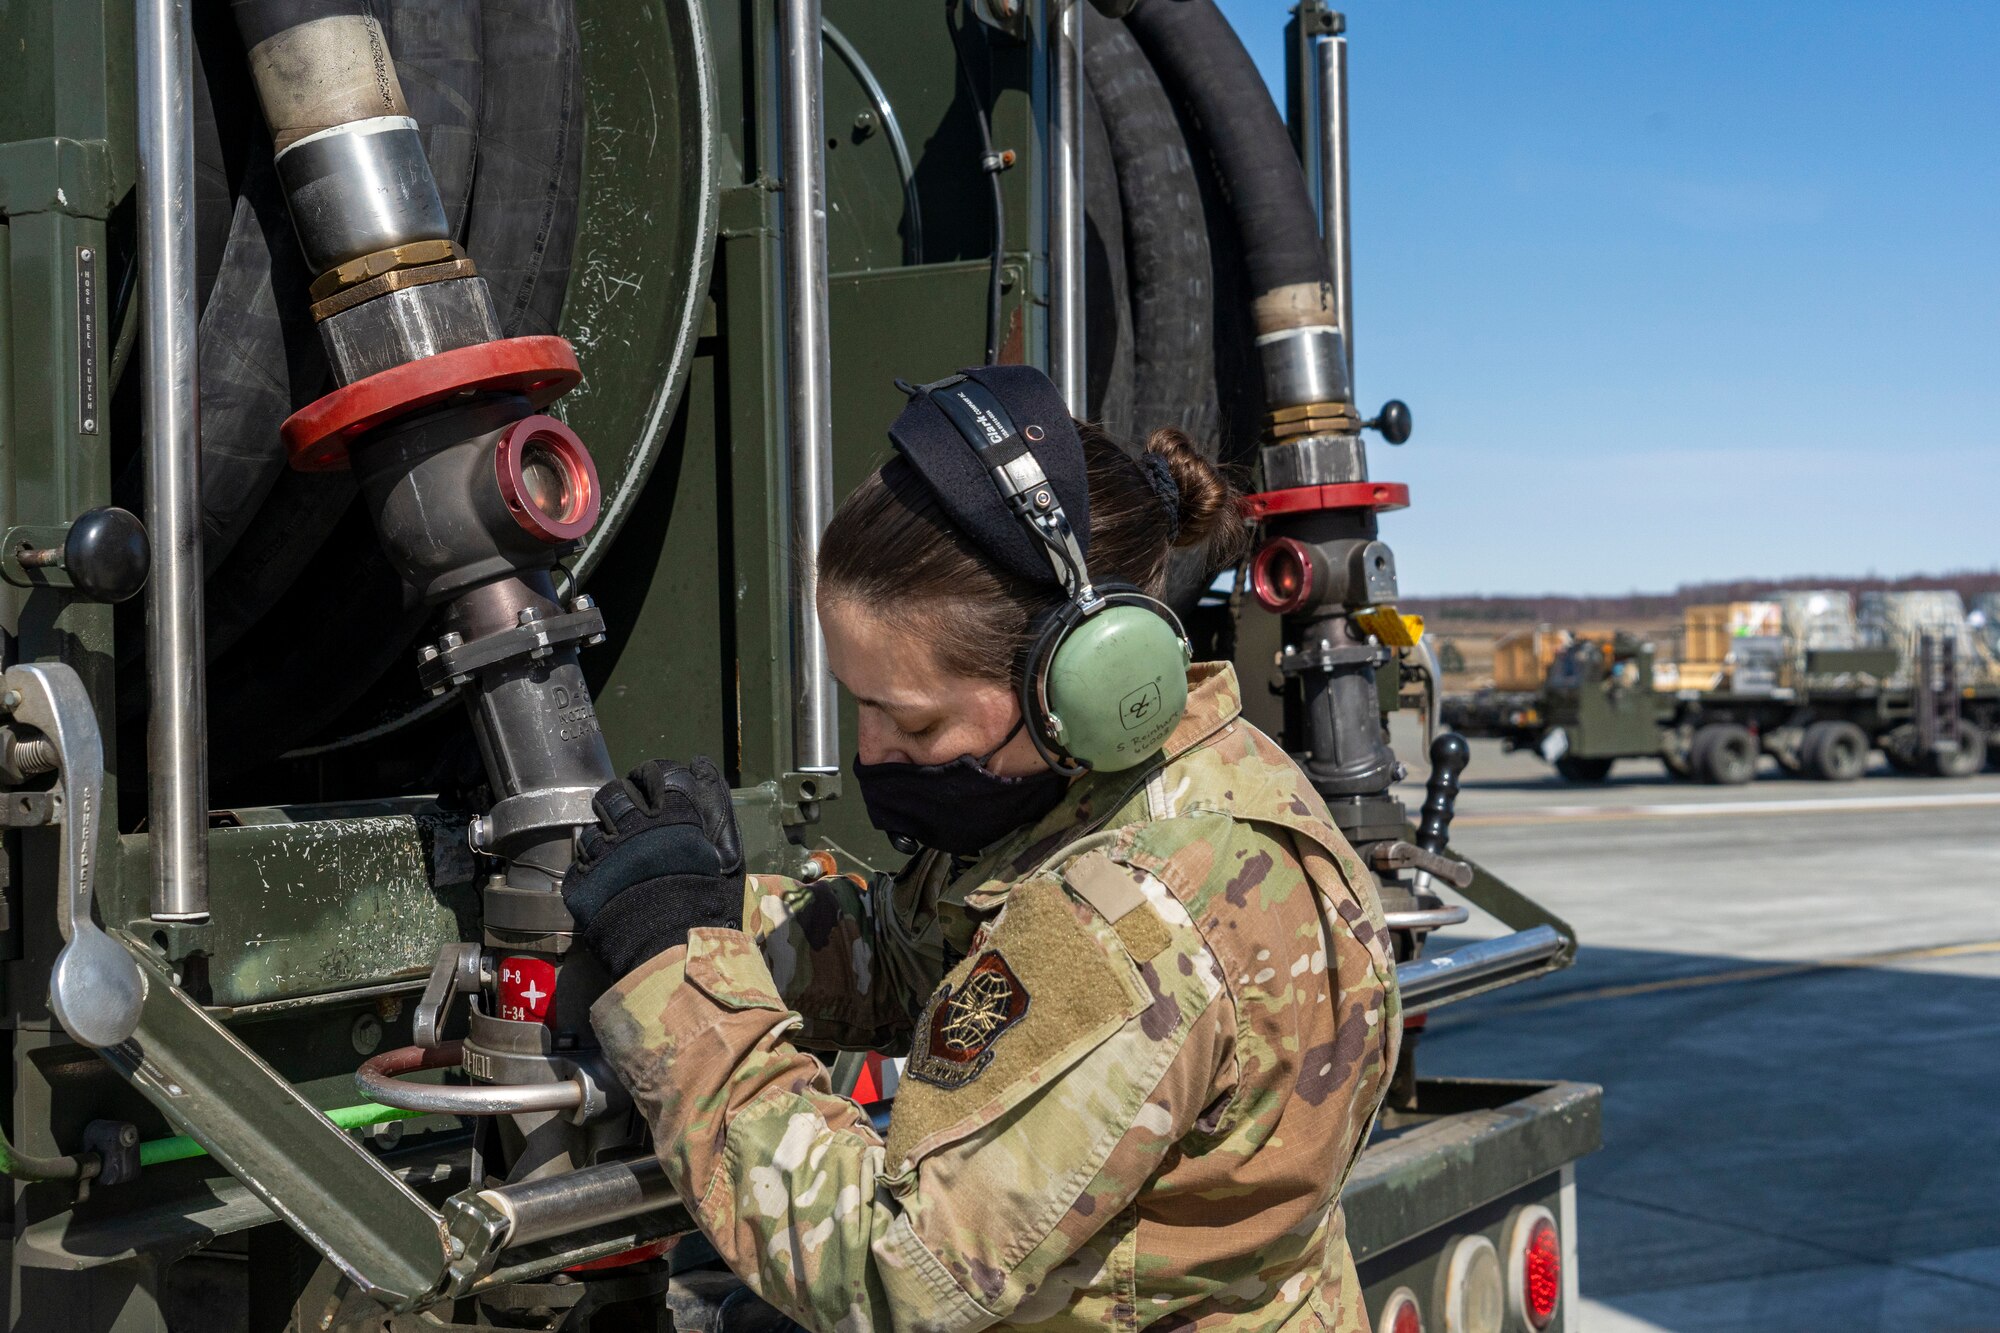 U.S. Air Force Tech. Sgt. Sarah Reinhart, a member of the 732d Air Mobility Squadron, secures a fuel nozzle onto an R-11 refueler after refueling a C-17 Globemaster III assigned to Joint Base Lewis-McChord, Washington, on the flightline at Joint Base Elmendorf-Richardson, Alaska, May 1, 2021, in support of Northern Edge 2021. Approximately 15,000 U.S. service members are participating in a joint training exercise hosted by U.S. Pacific Air Forces May 3-14, 2021, on and above the Joint Pacific Alaska Range Complex, the Gulf of Alaska, and temporary maritime activities area. NE21 is one in a series of U.S. Indo-Pacific Command exercises designed to sharpen the joint forces’ skills; to practice tactics, techniques, and procedures; to improve command, control and communication relationships; and to develop cooperative plans and programs.